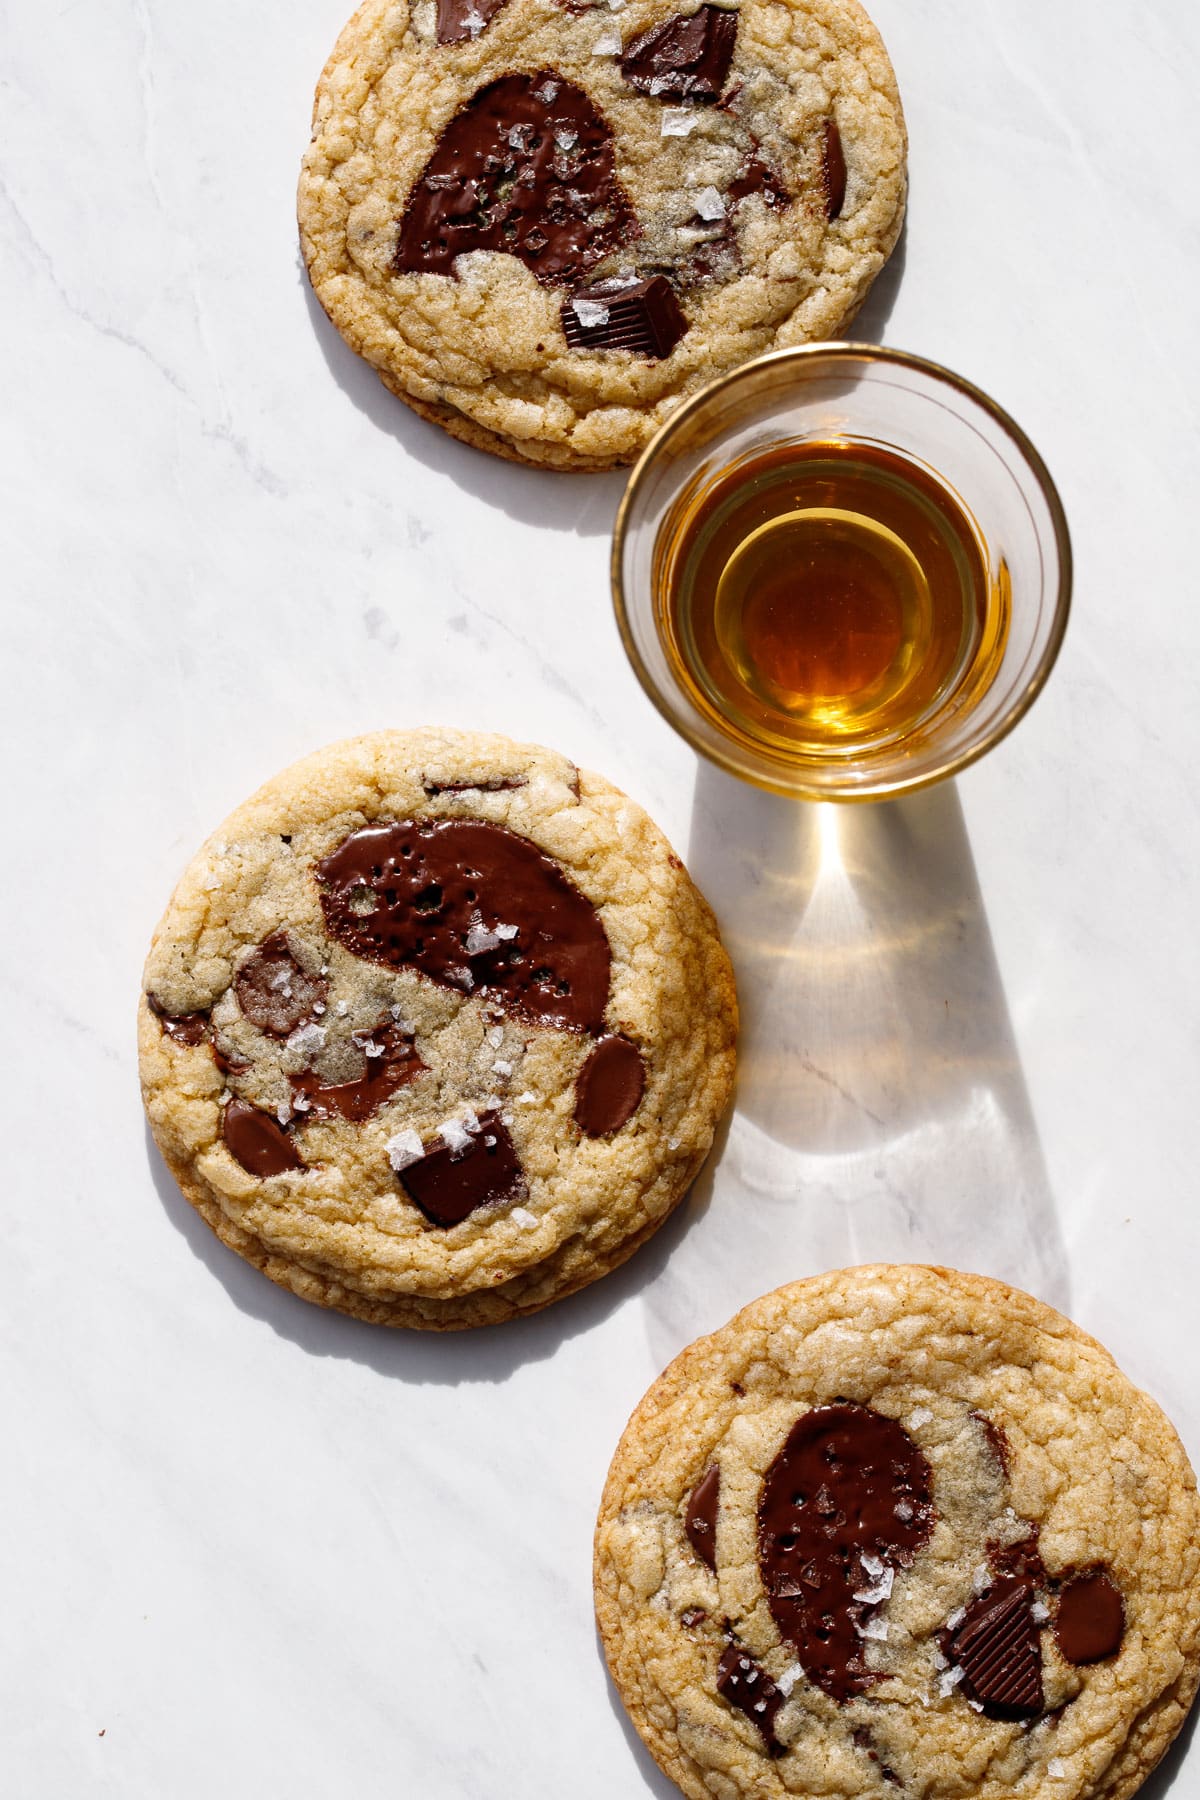 Three Amaretto Chocolate Chip Cookies on a marble background with a shot glass of amaretto liqueur.